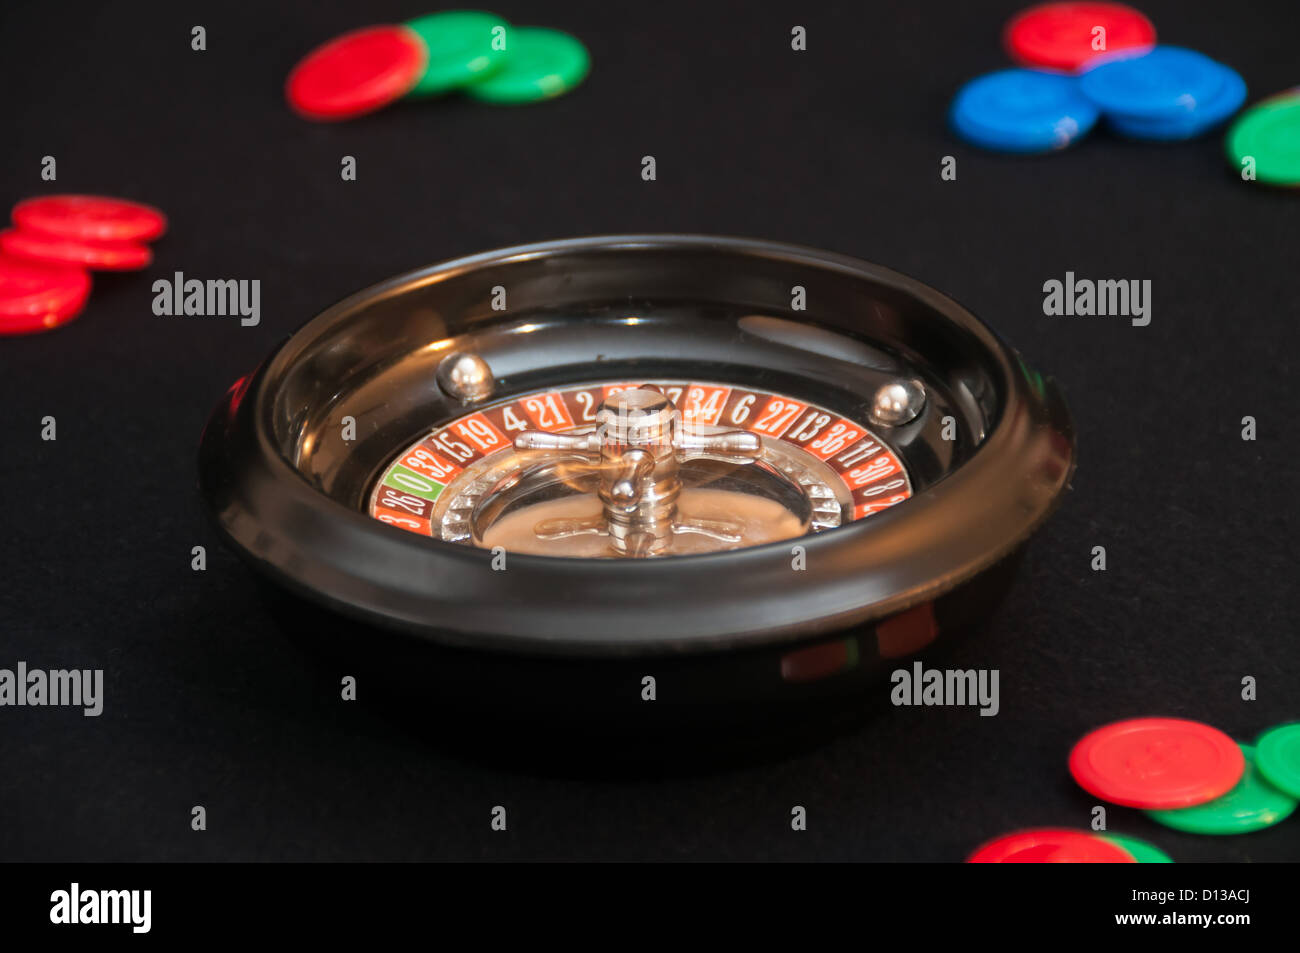 Miniature roulette wheel and cash chips. Stock Photo